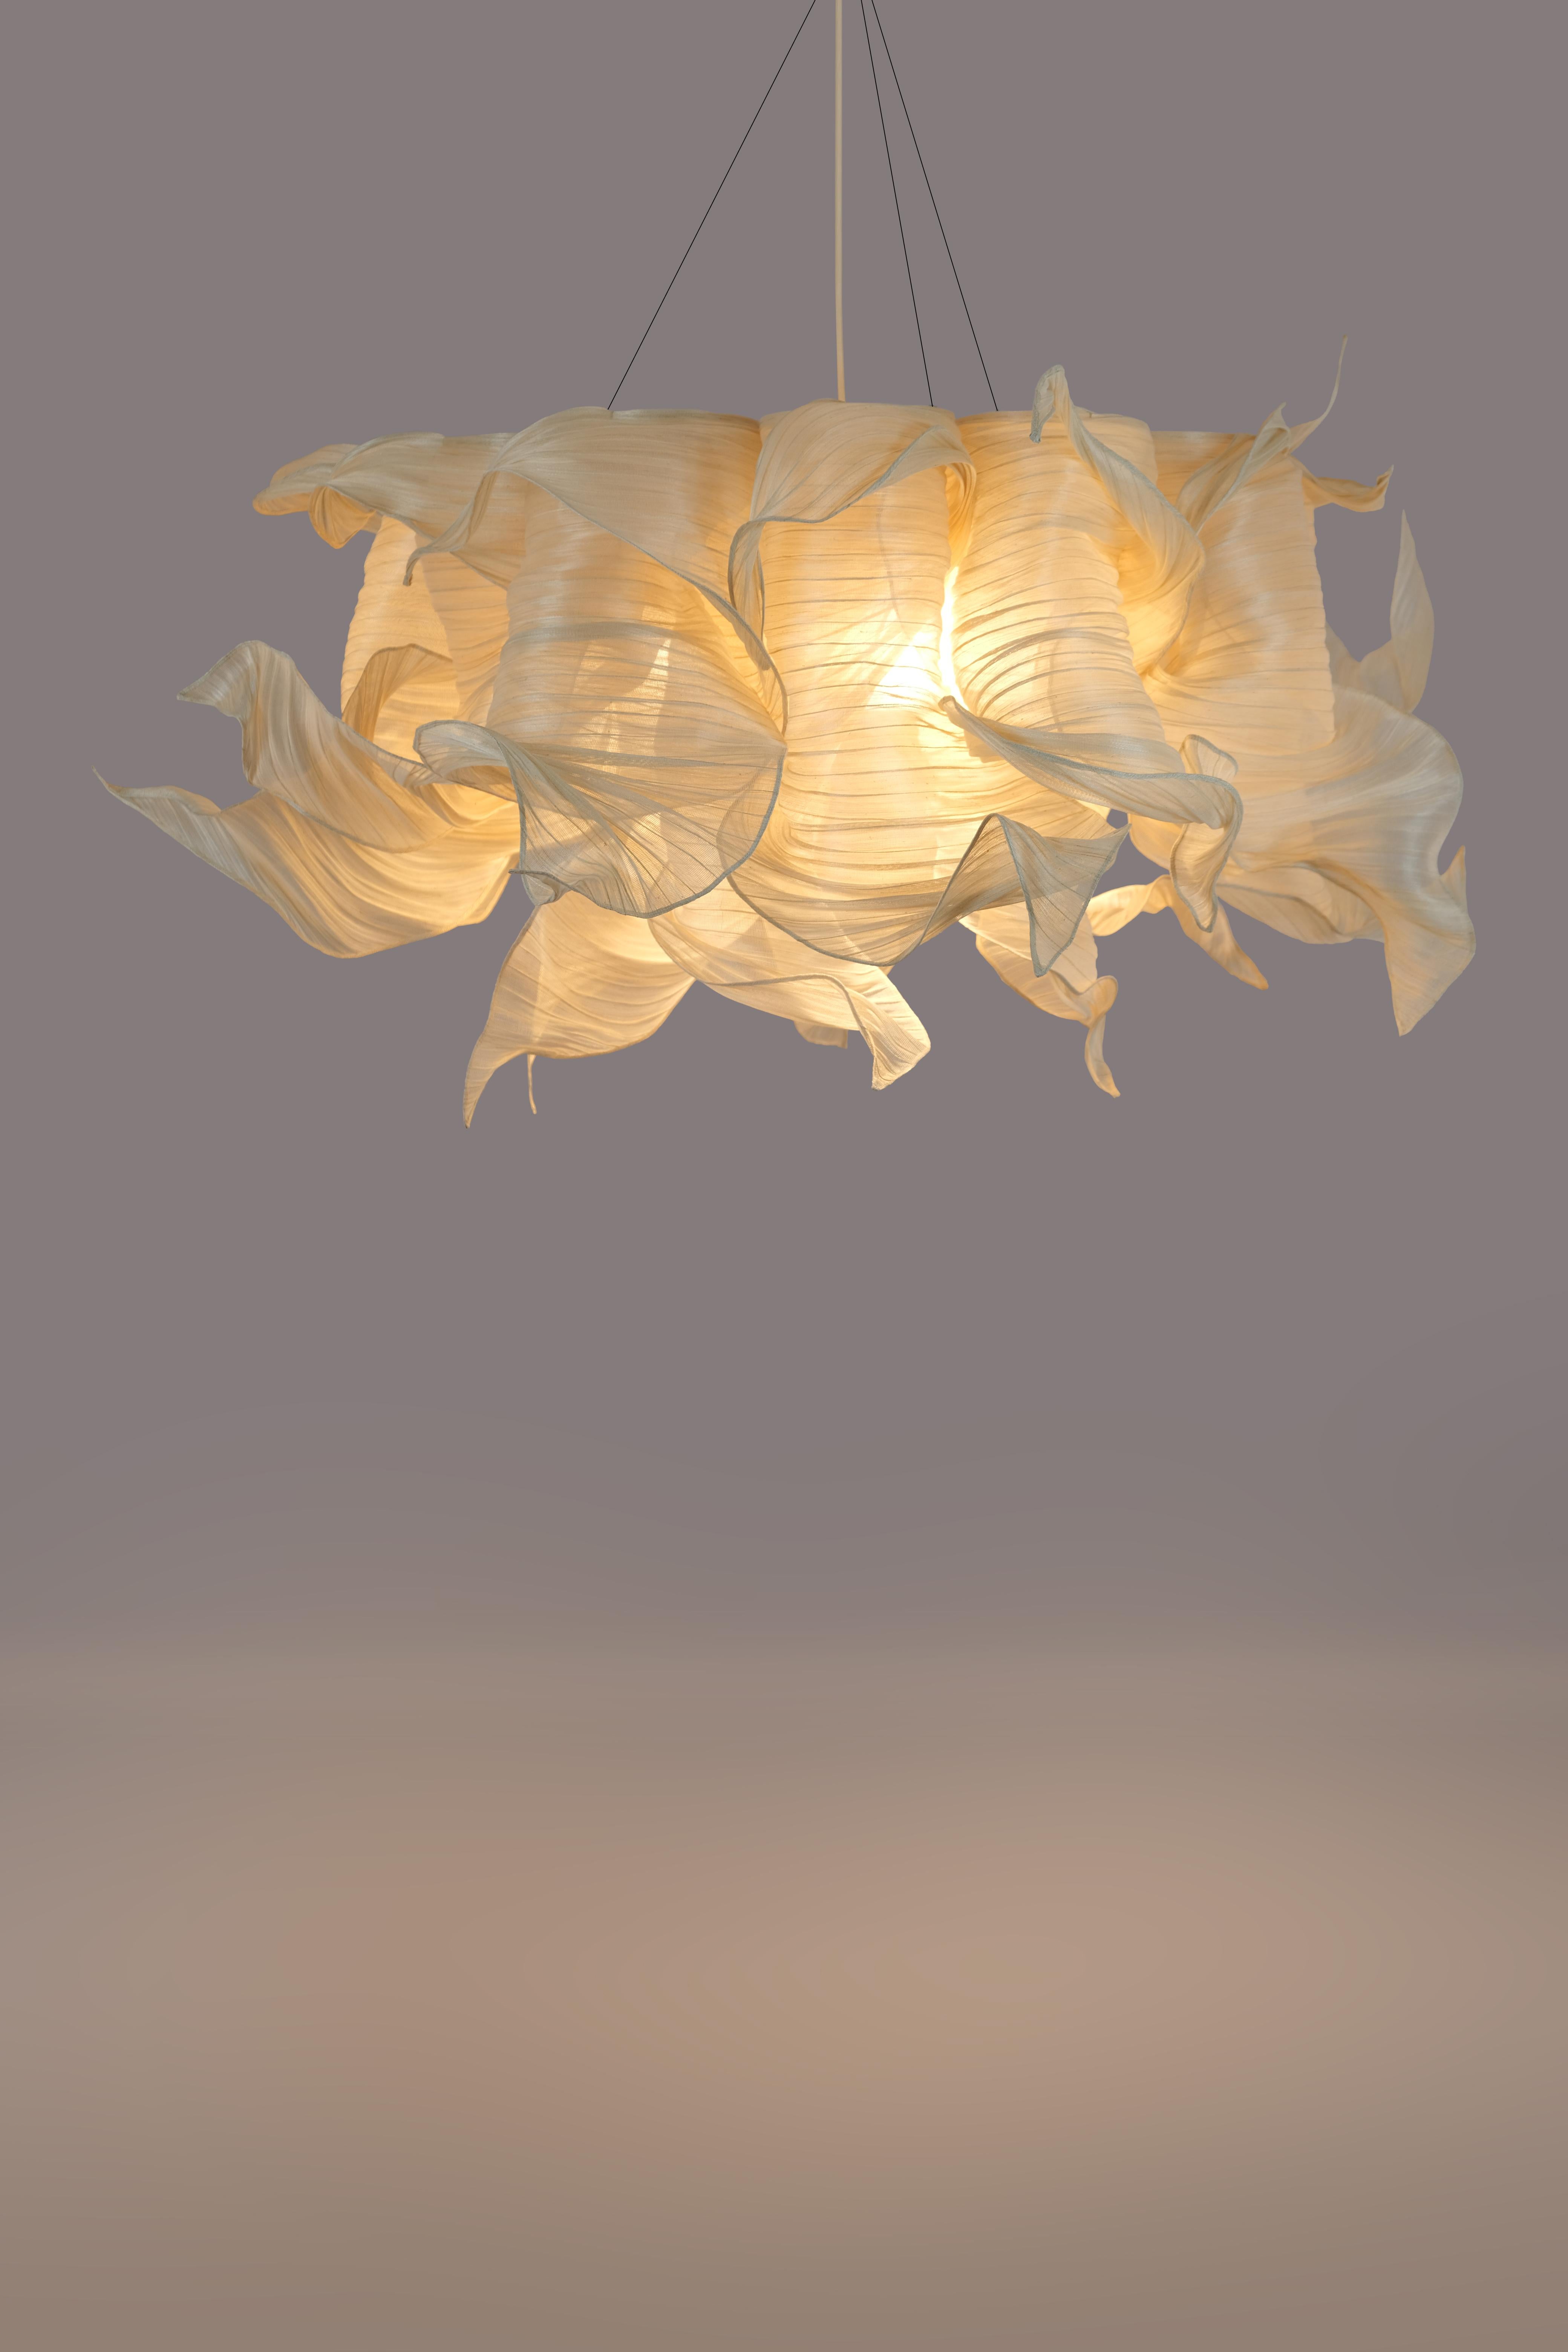 Nebula Grande 100 cm Round Collectible Banaca Fiber Pendant Light x Mirei Monticeli - Cream 

The Nebula collection is drawn out of the interstellar clouds of dust and gas in space - regions where stars begin to form. Made of a woven natural fiber